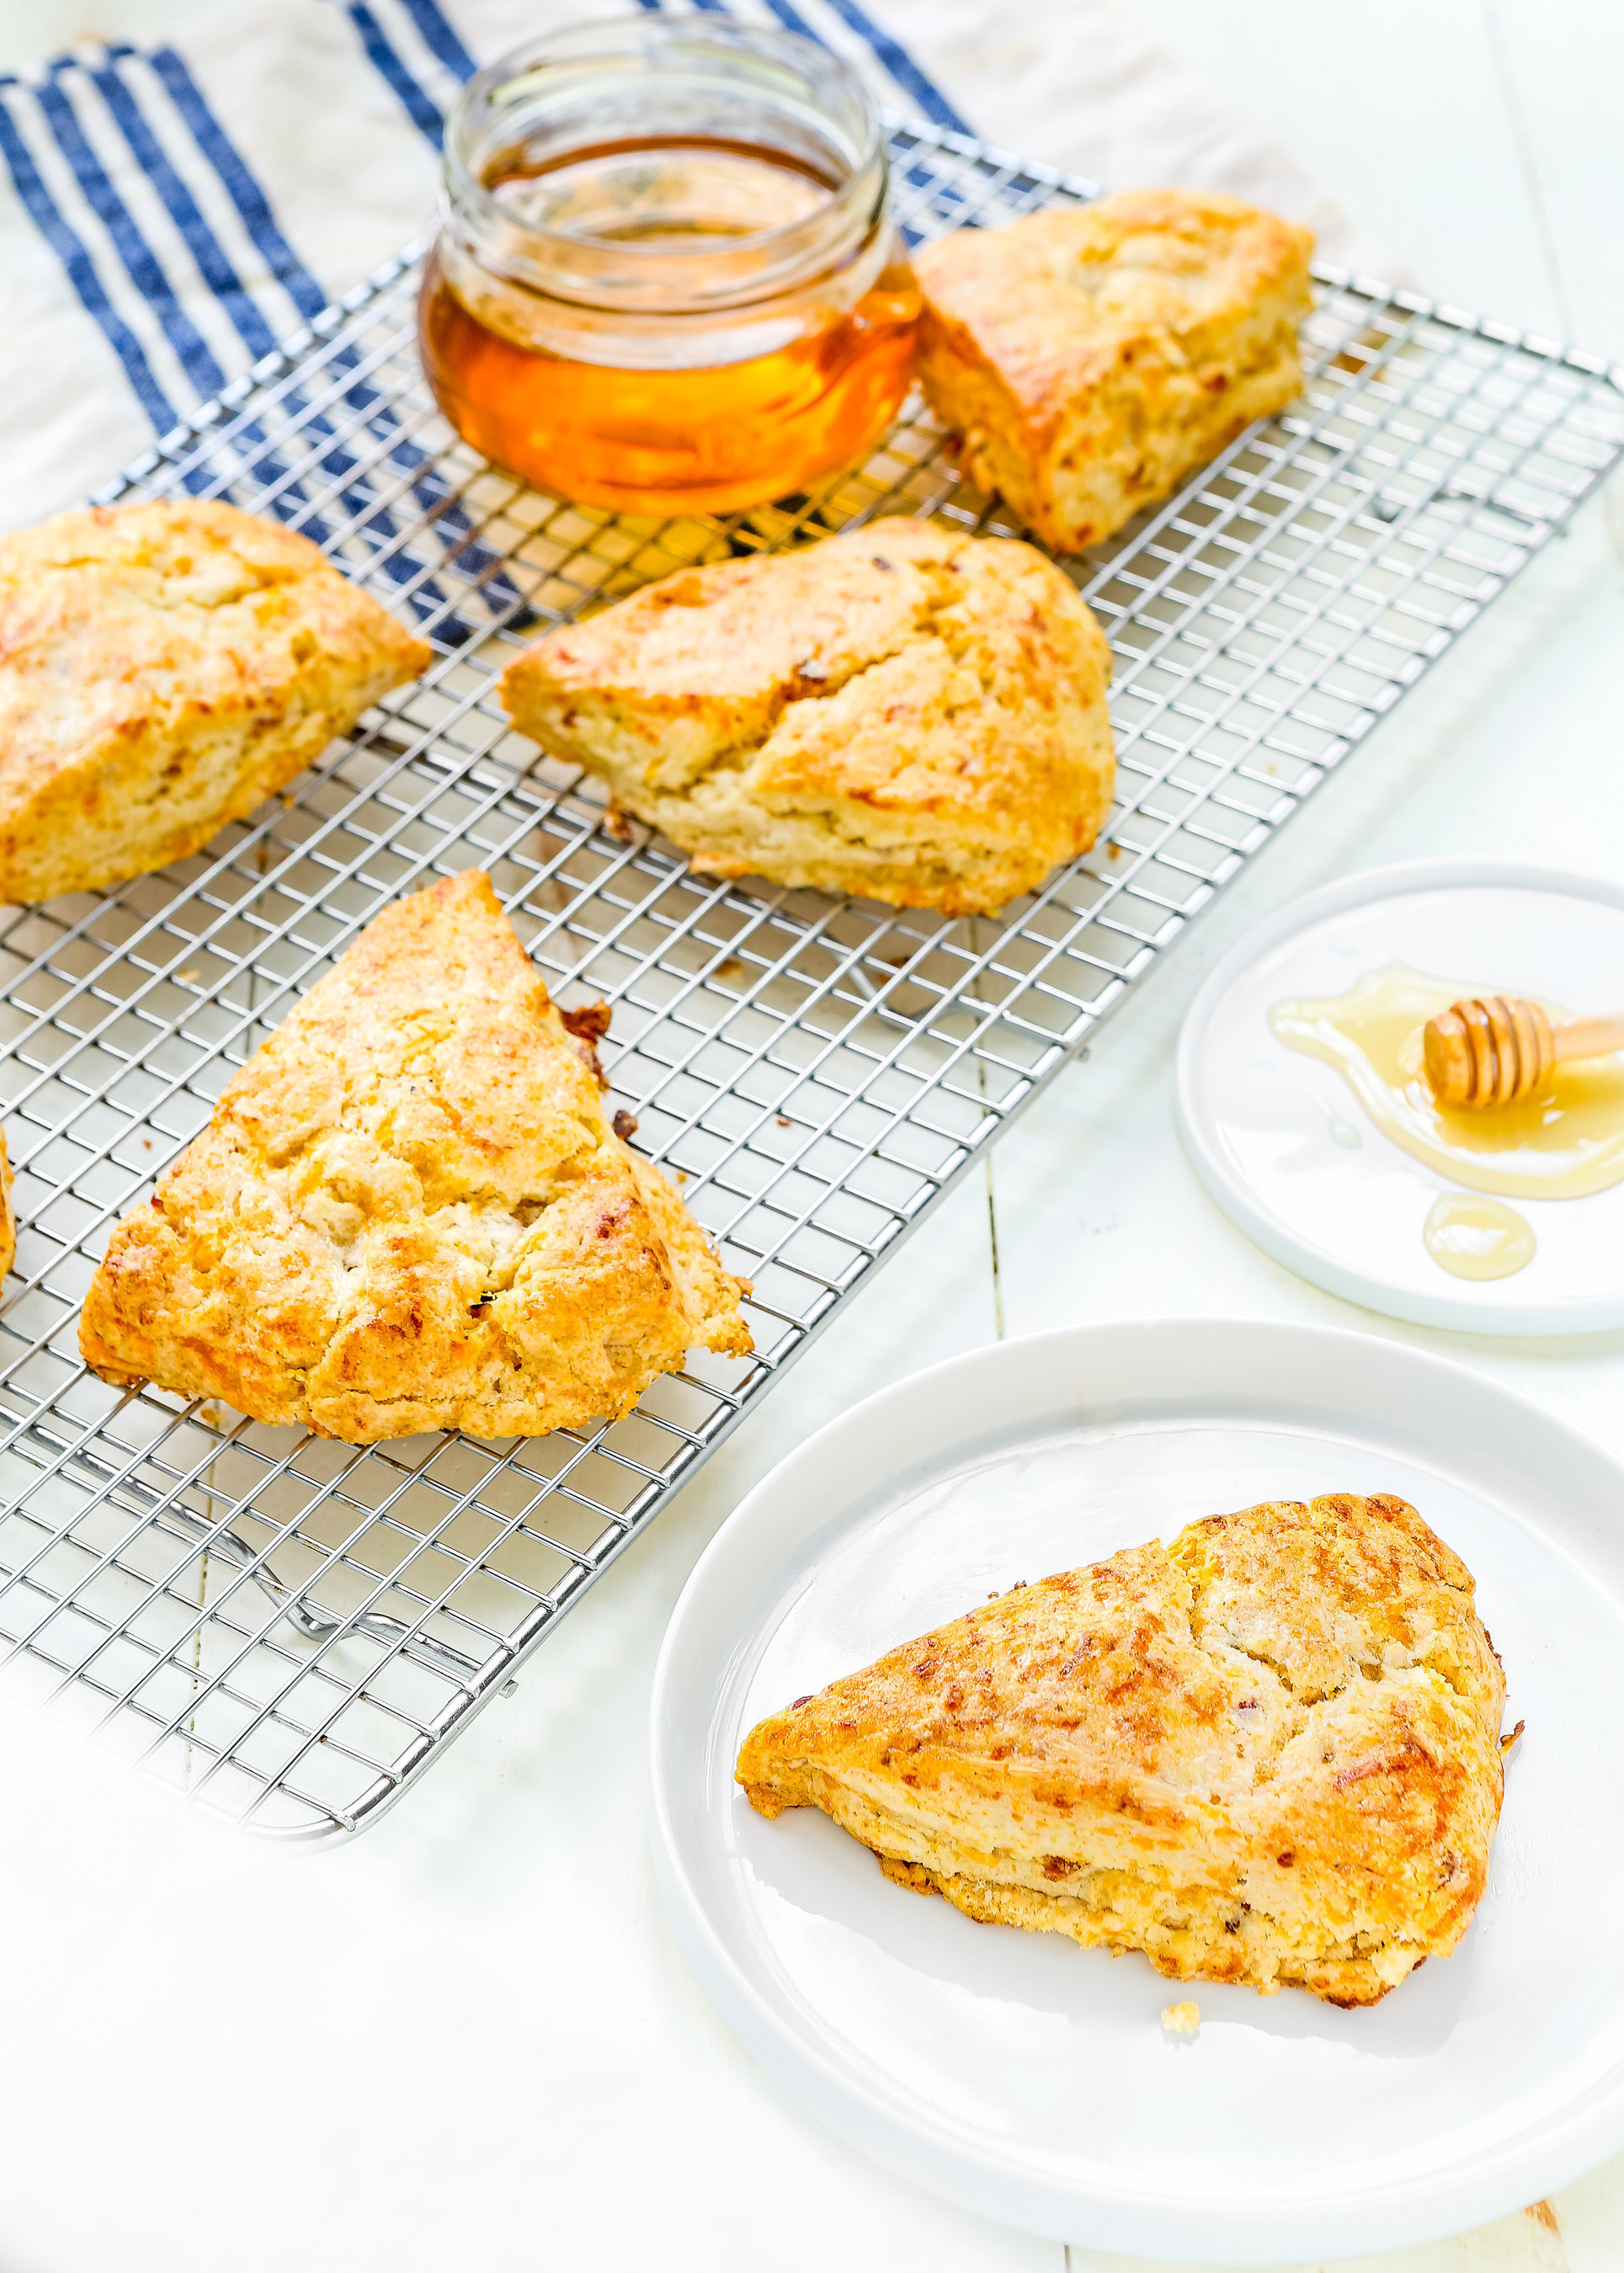 If you want a delicious sweet and savory baked treat for snack, these Honey Bacon-Cheddar scones fill the bill.  Courtesy: National Honey Board